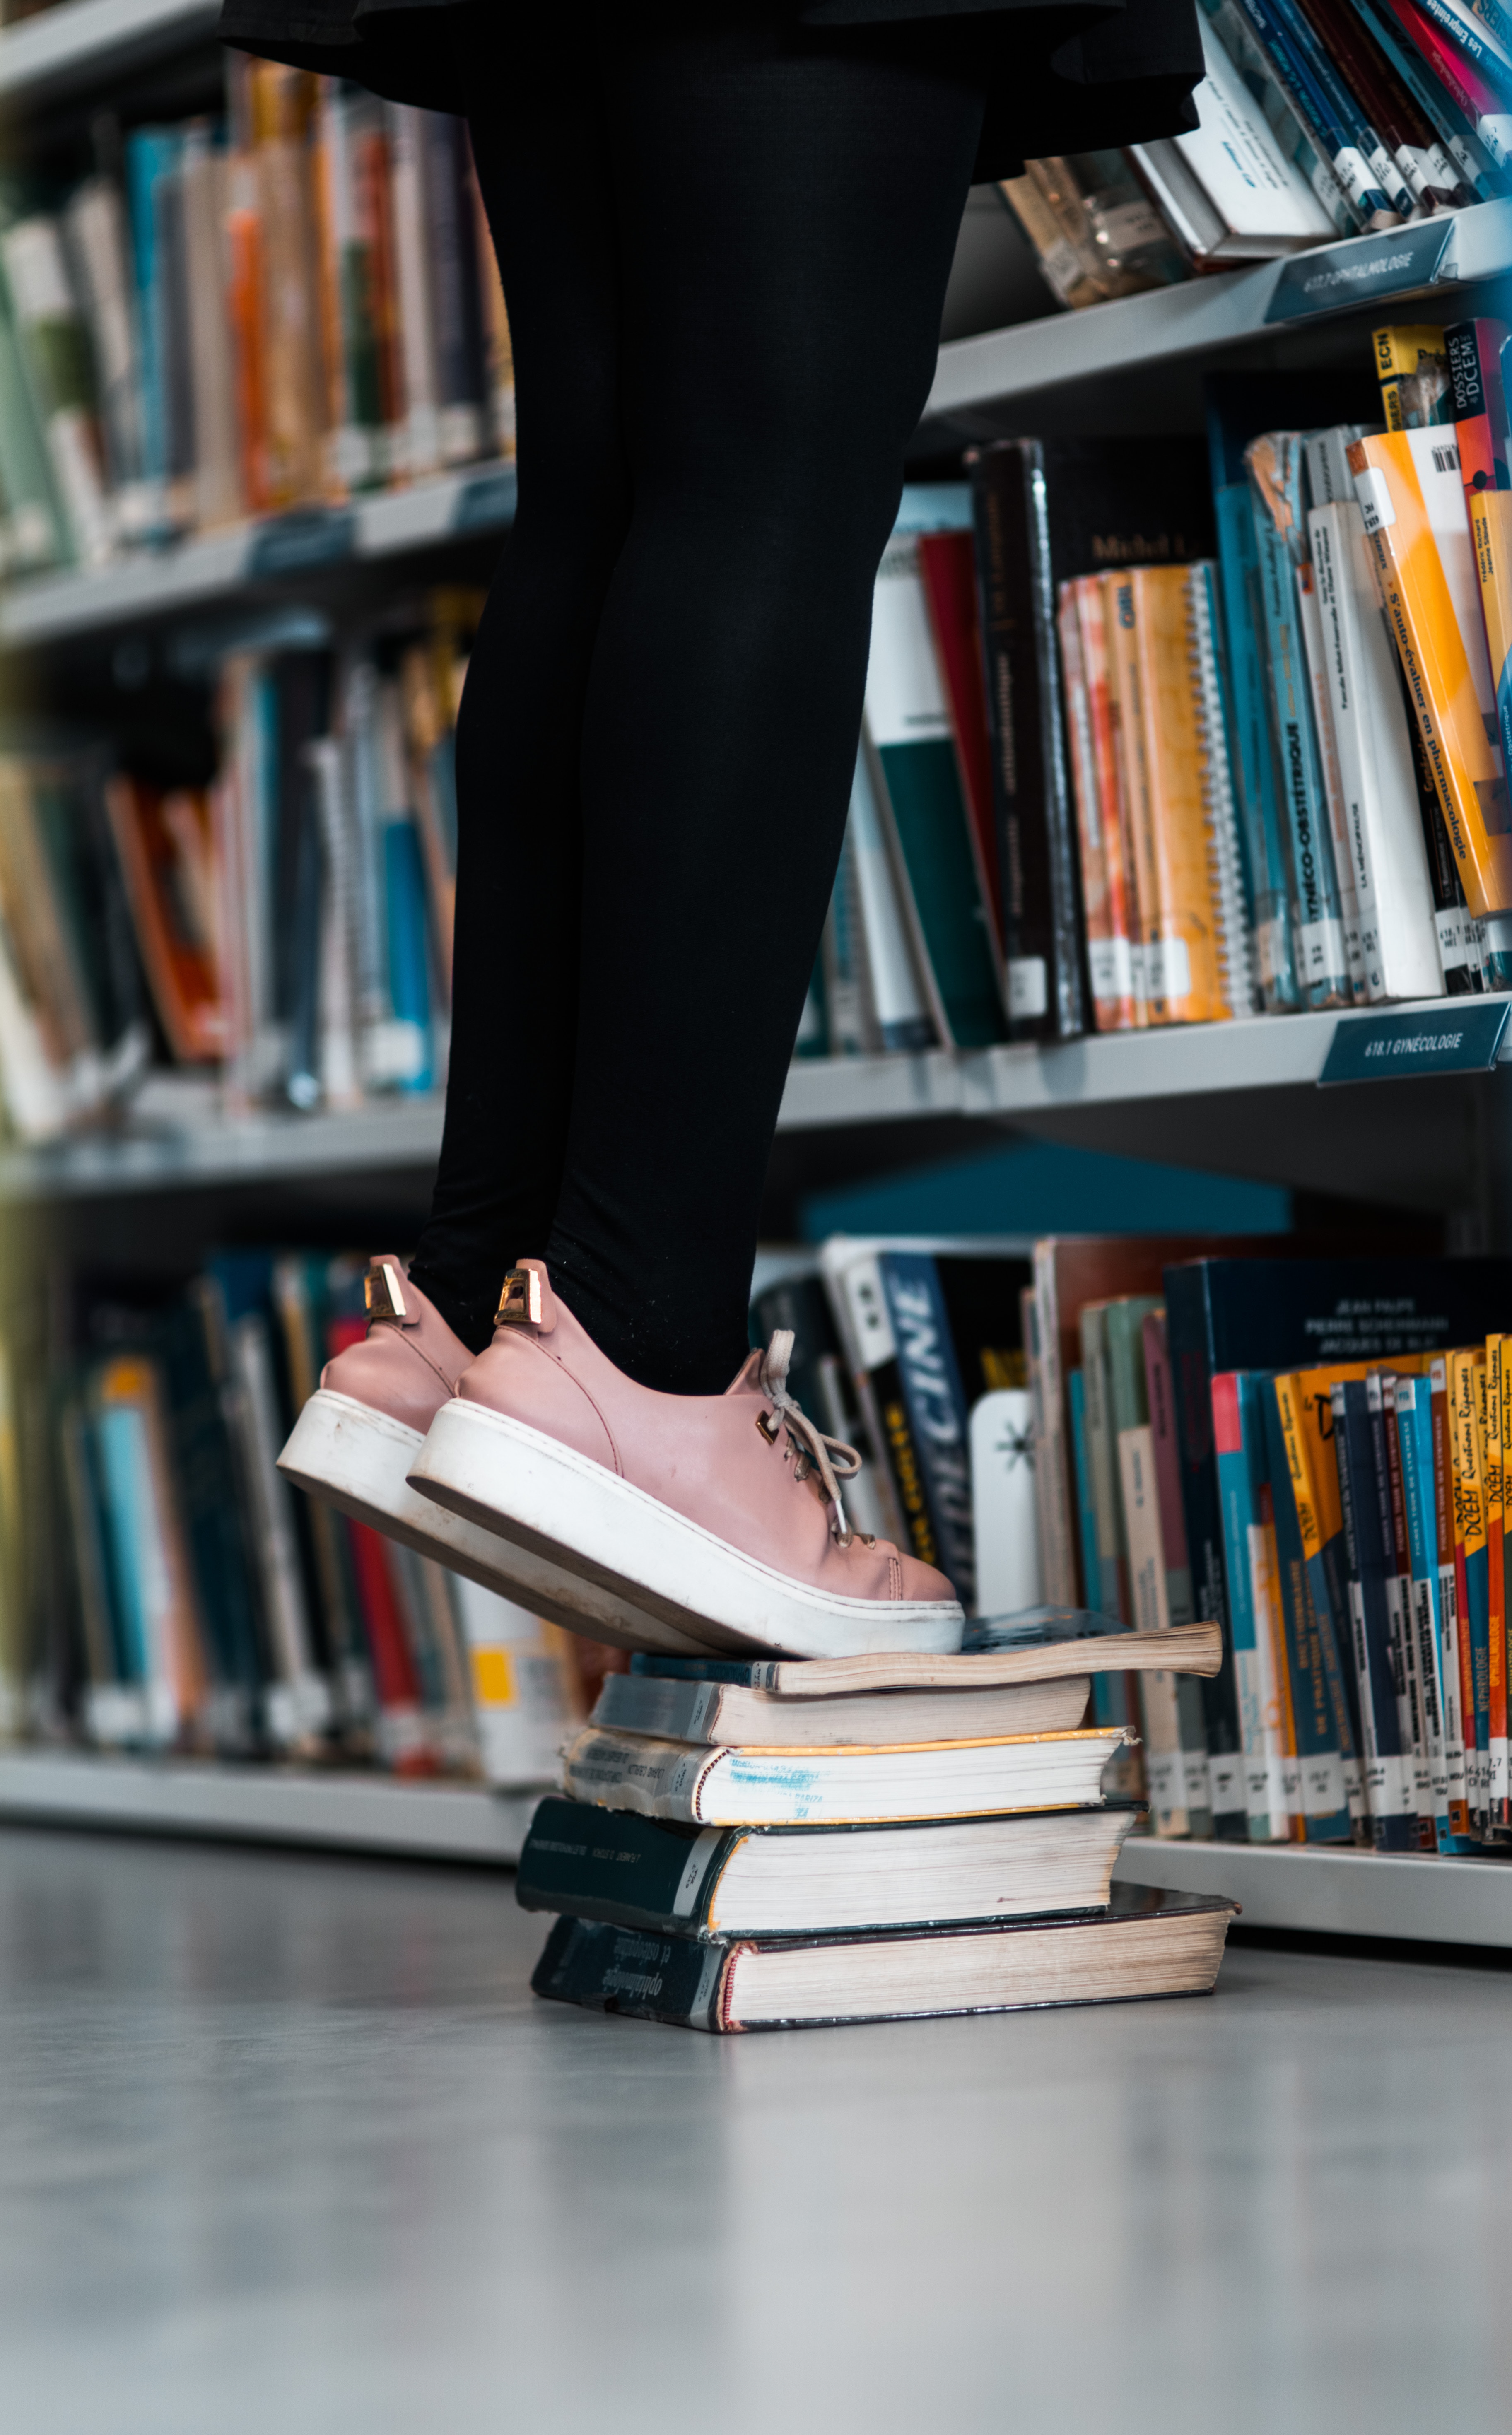 Download mobile wallpaper Miscellaneous, Bookshelves, Miscellanea, Legs, Sneakers, Library, Books for free.